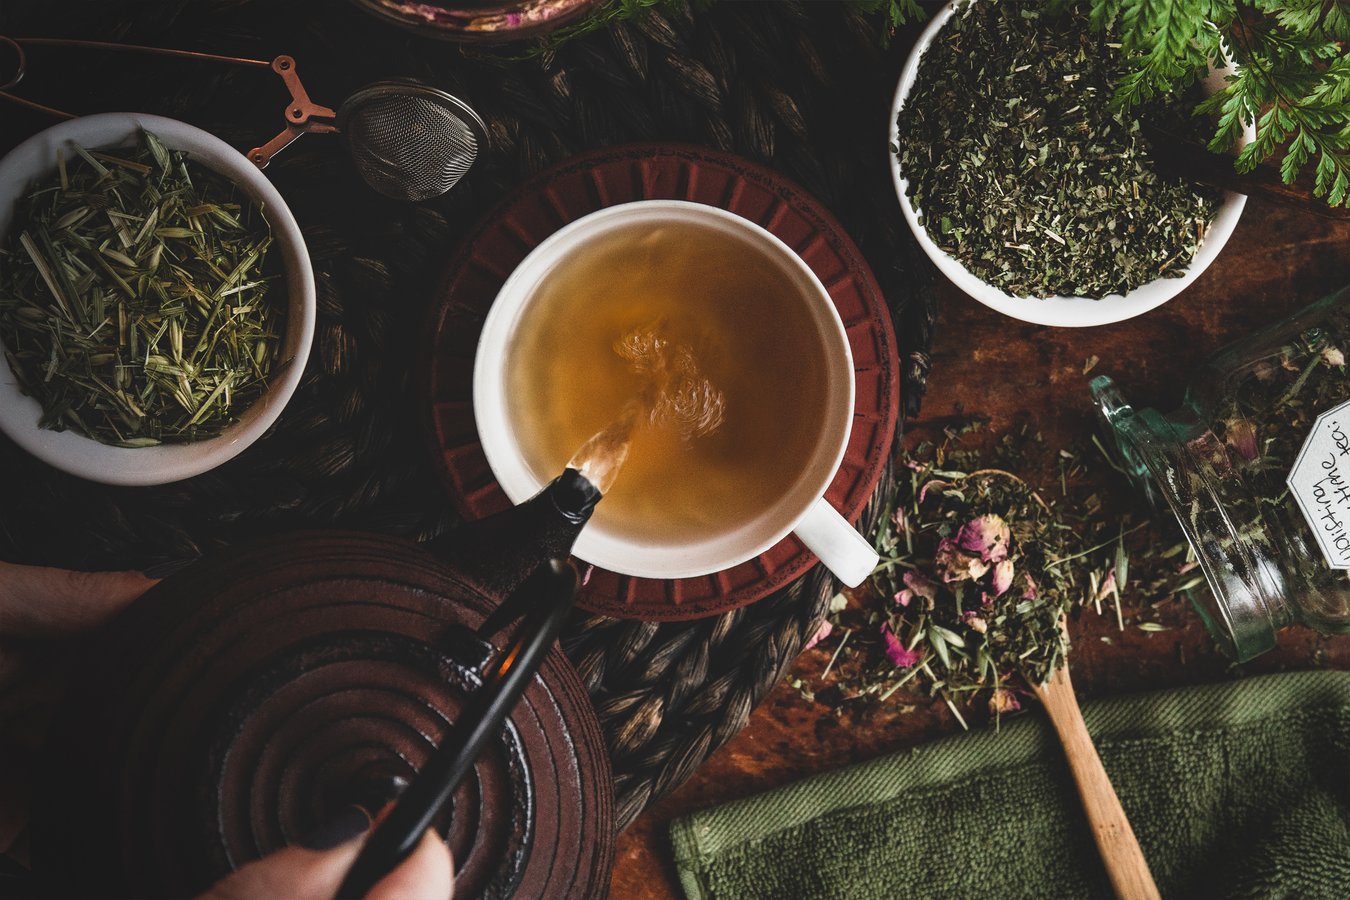 A delicious cup of herbal tea is poured.